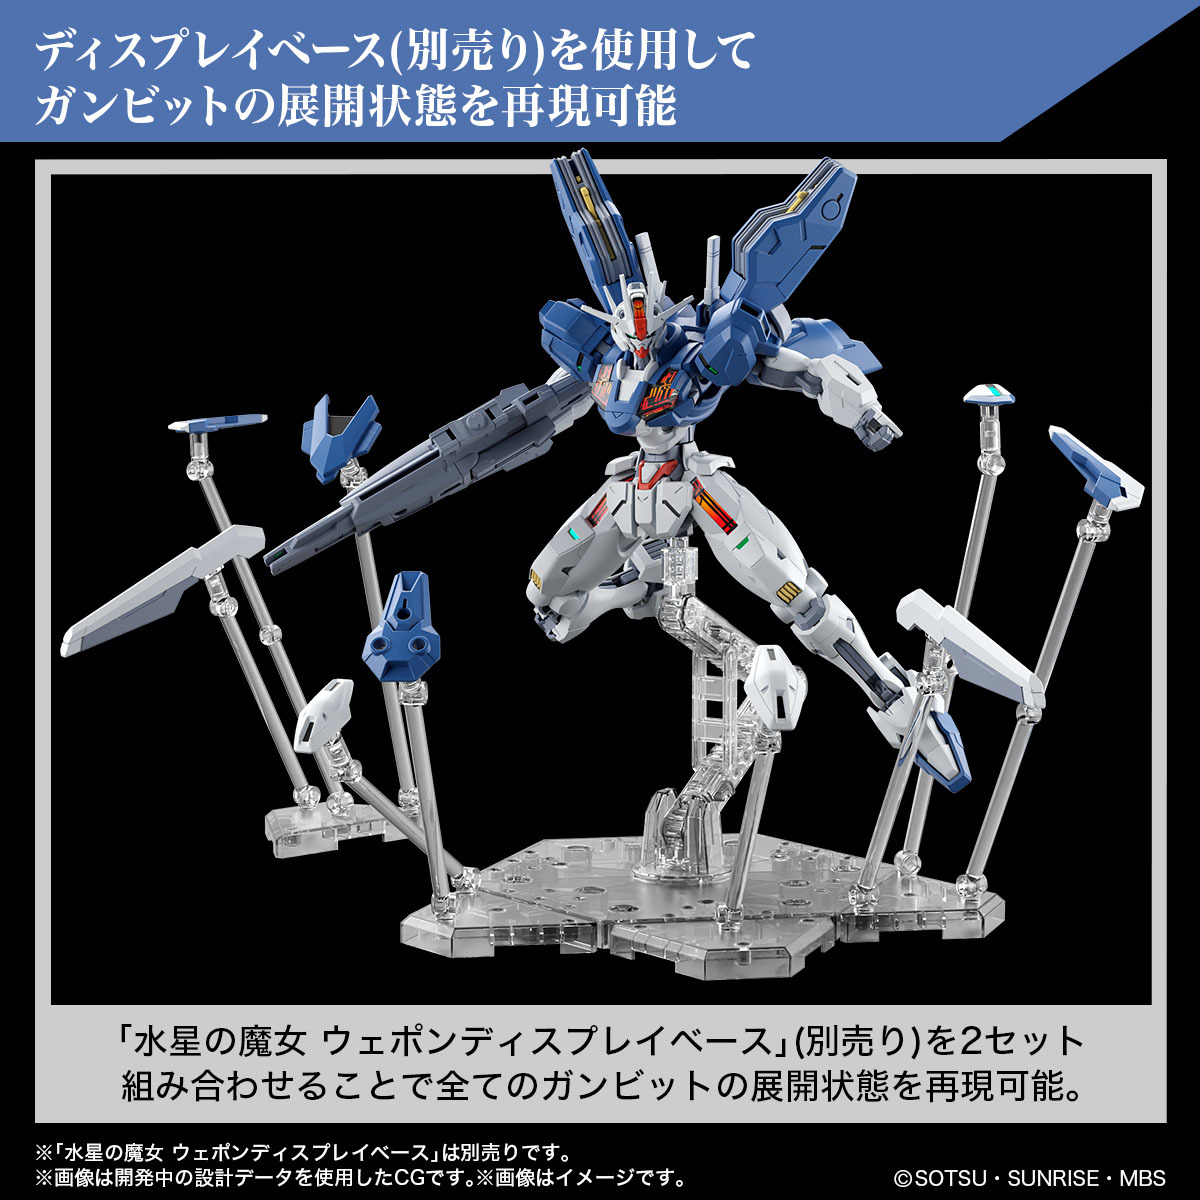 HG 1/144 Gundam Aerial Rebuild - Release Info, Box art and Official Images